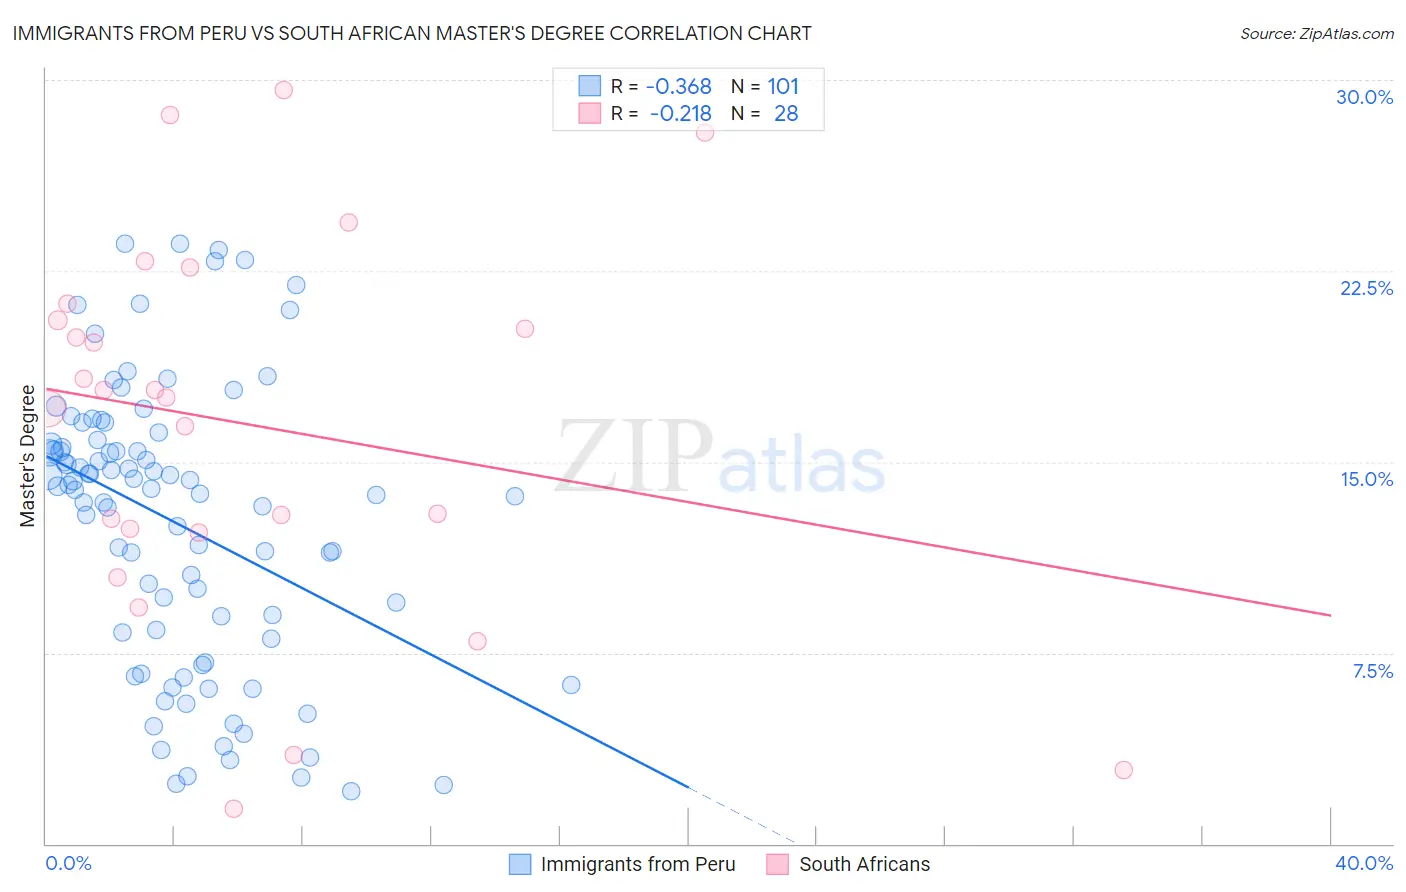 Immigrants from Peru vs South African Master's Degree